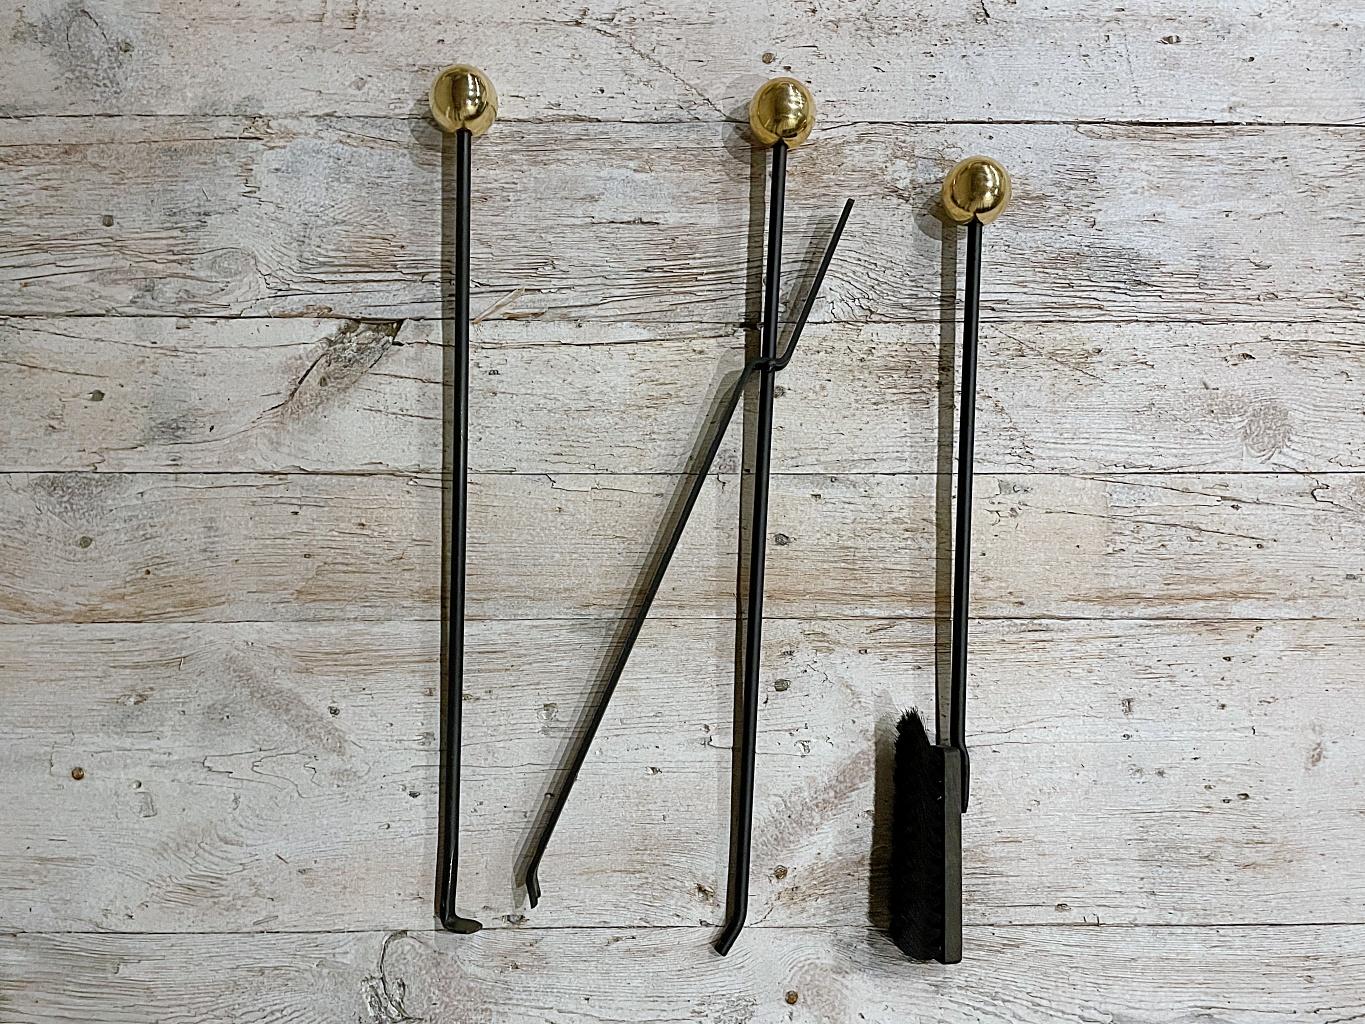 Midcentury Modern Minimalistic Tower Brass & Steel Fireplace Tools, 1960s, Italy For Sale 2